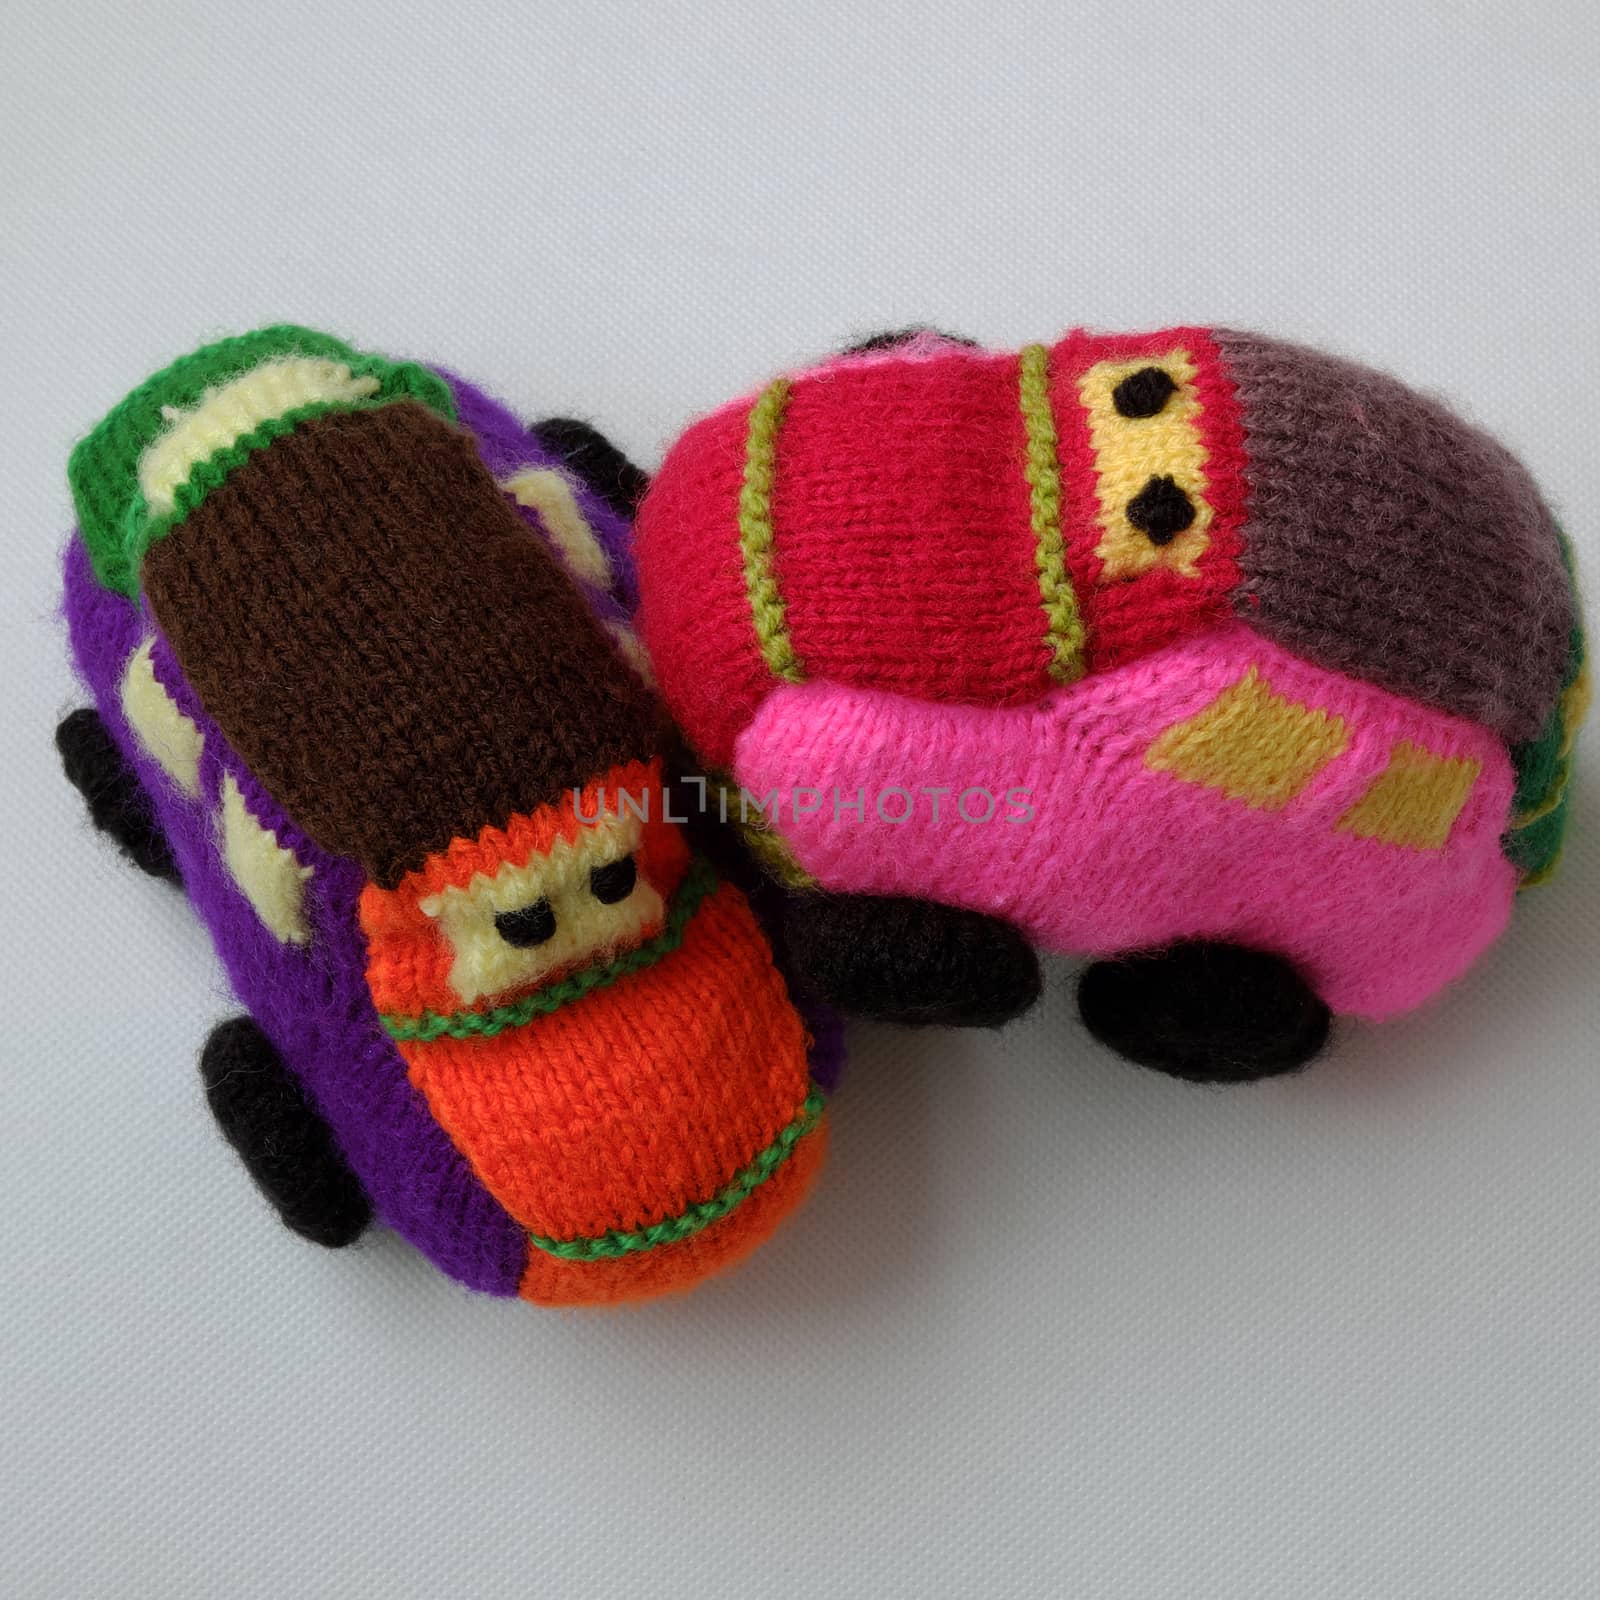 Handmade gift for children, knit baby car by xuanhuongho